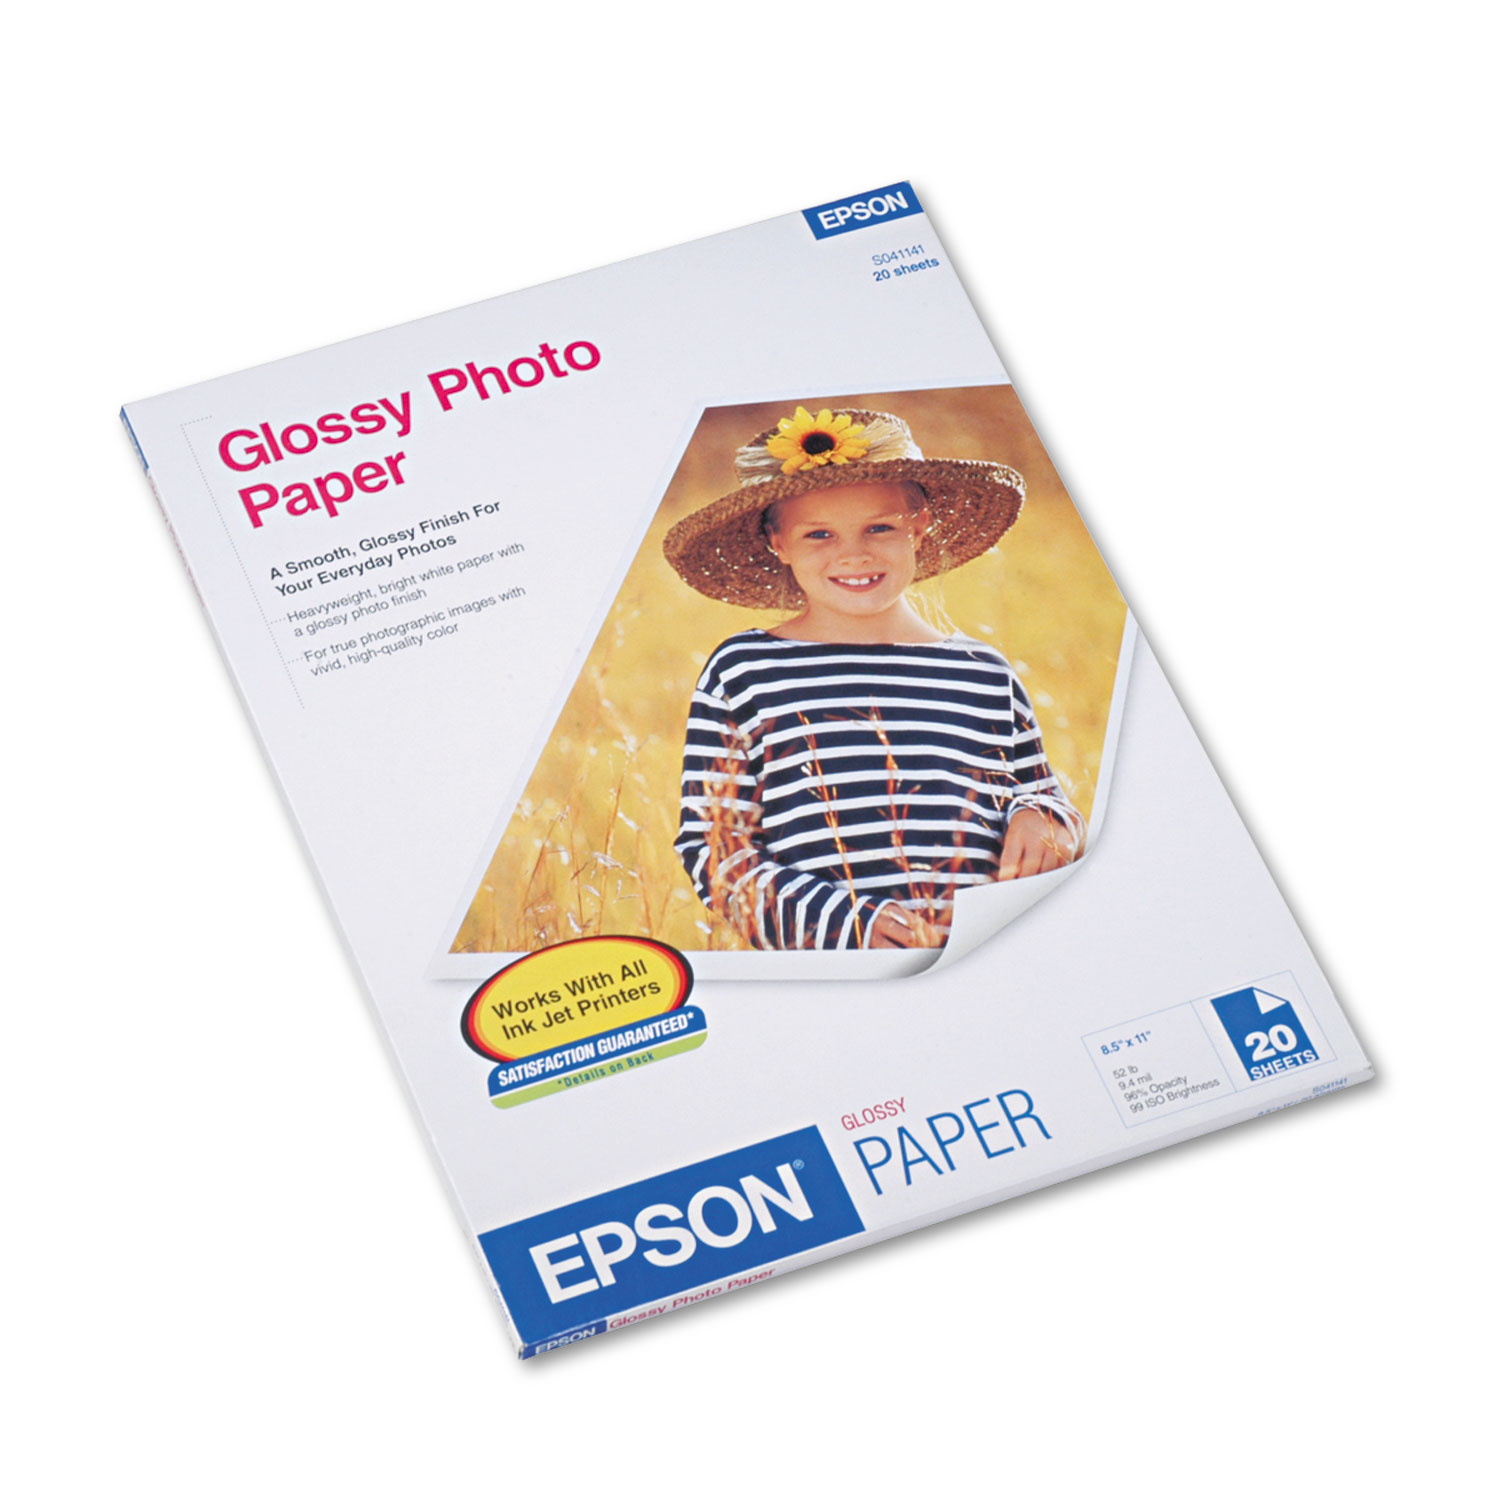 Glossy Photo Paper, 60 lbs., Glossy, 8-1/2 x 11, 20 Sheets/Pack